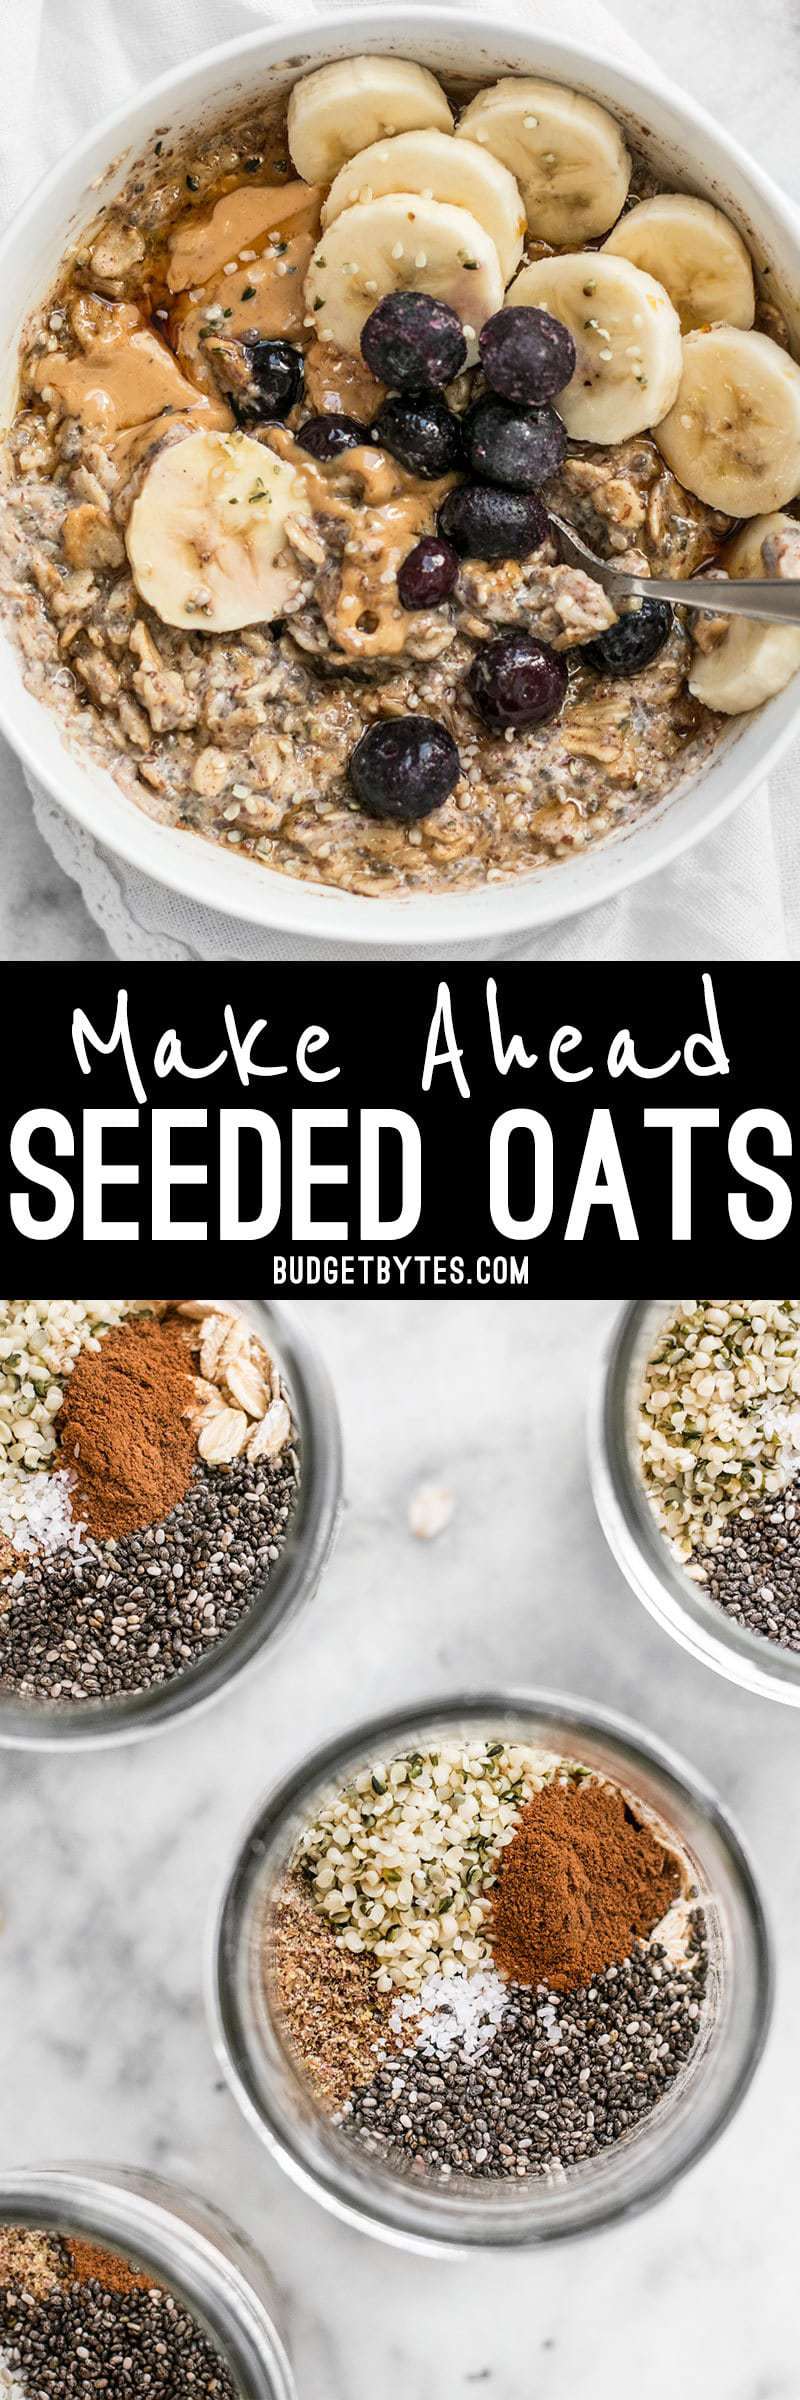 Preparing individual oat packs with seeds, seasoning, and other add-ins, like these Make Ahead Seeded Oats, makes having a healthy breakfast fast and easy. BudgetBytes.com